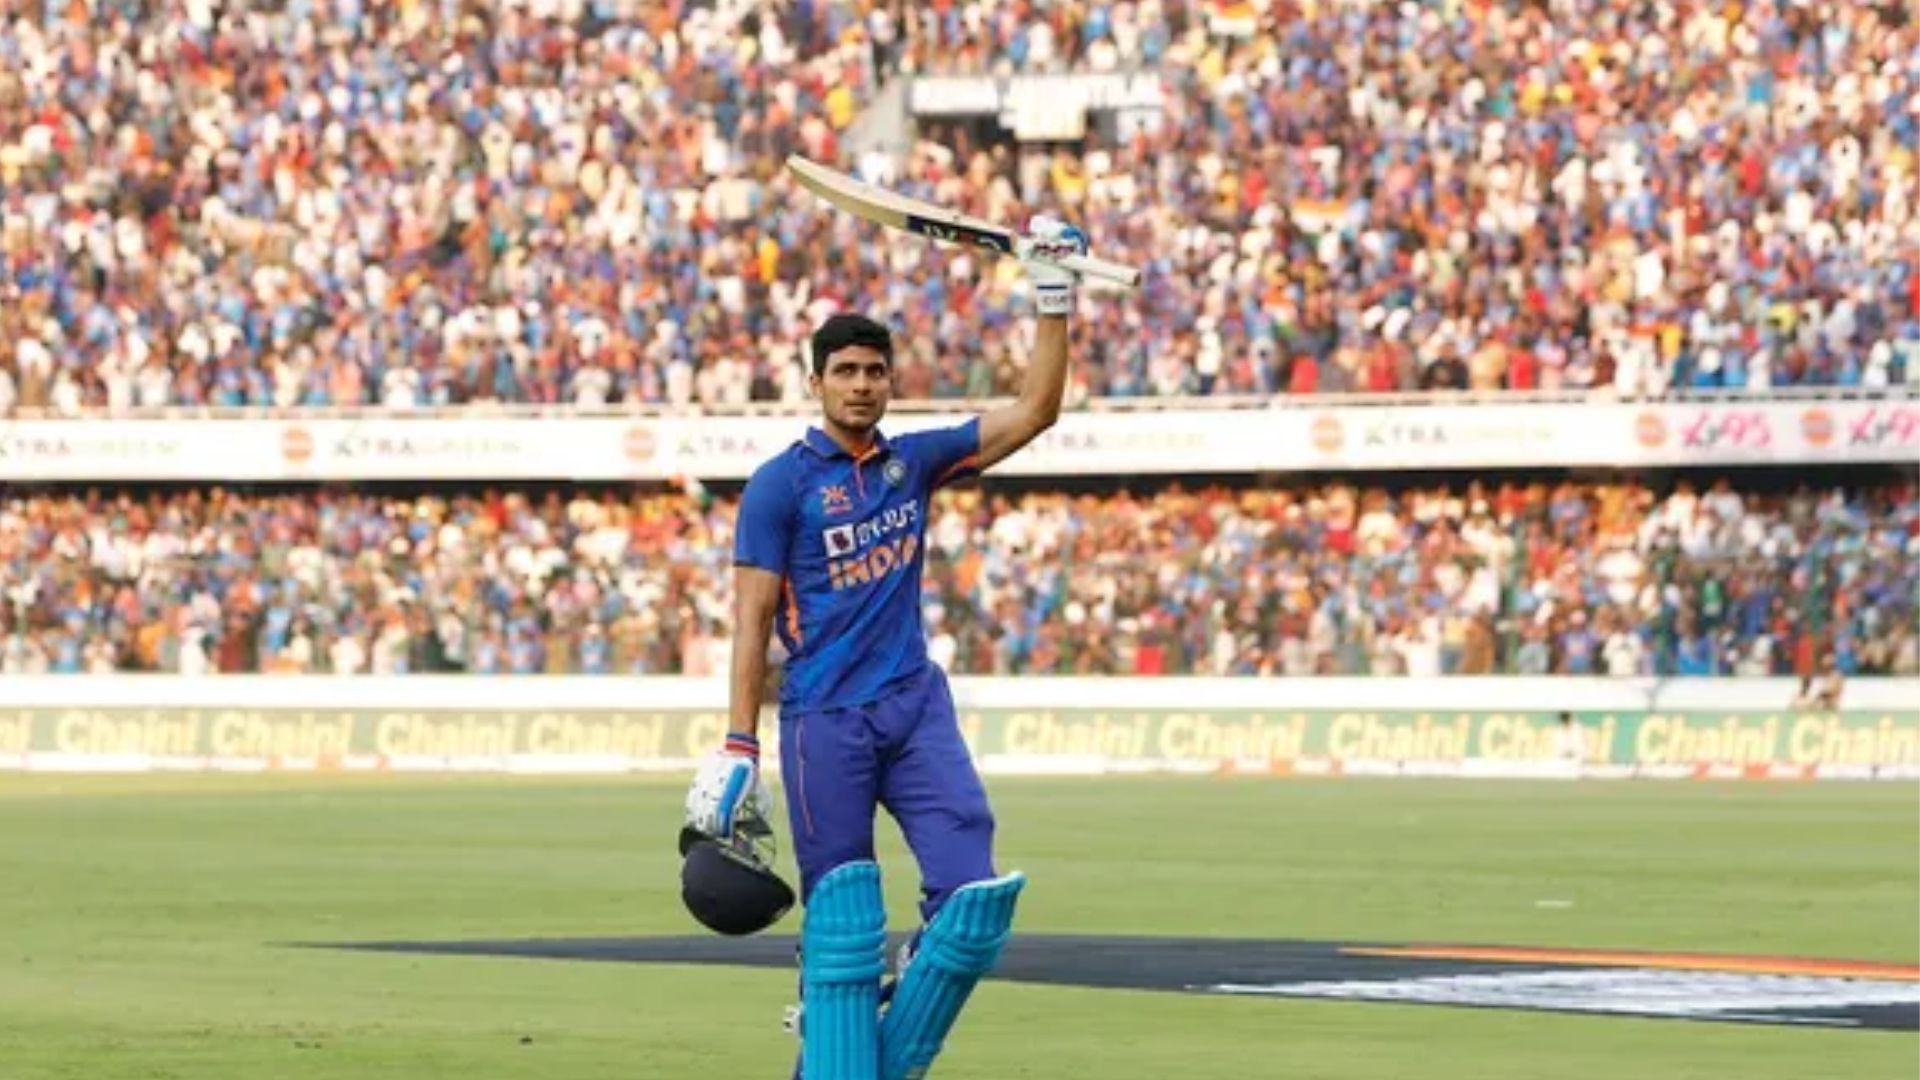 Shubman Gill is touted as the next Indian superstar in the making.